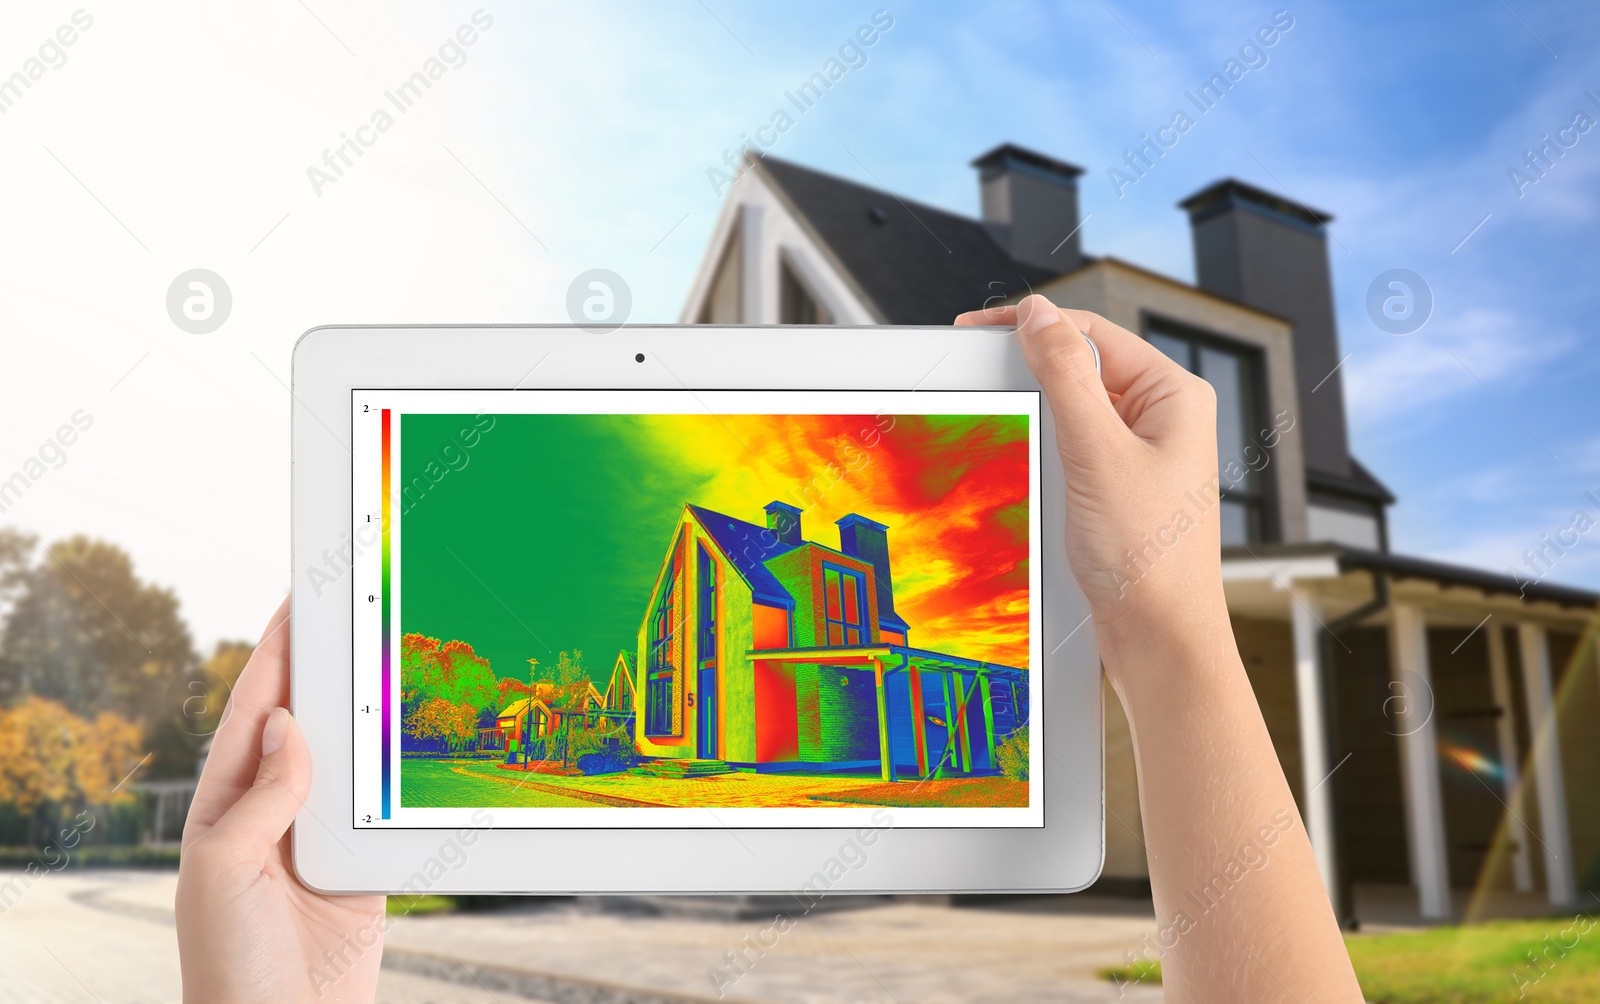 Image of Woman detecting heat loss in house using thermal viewer on tablet, outdoors. Energy efficiency